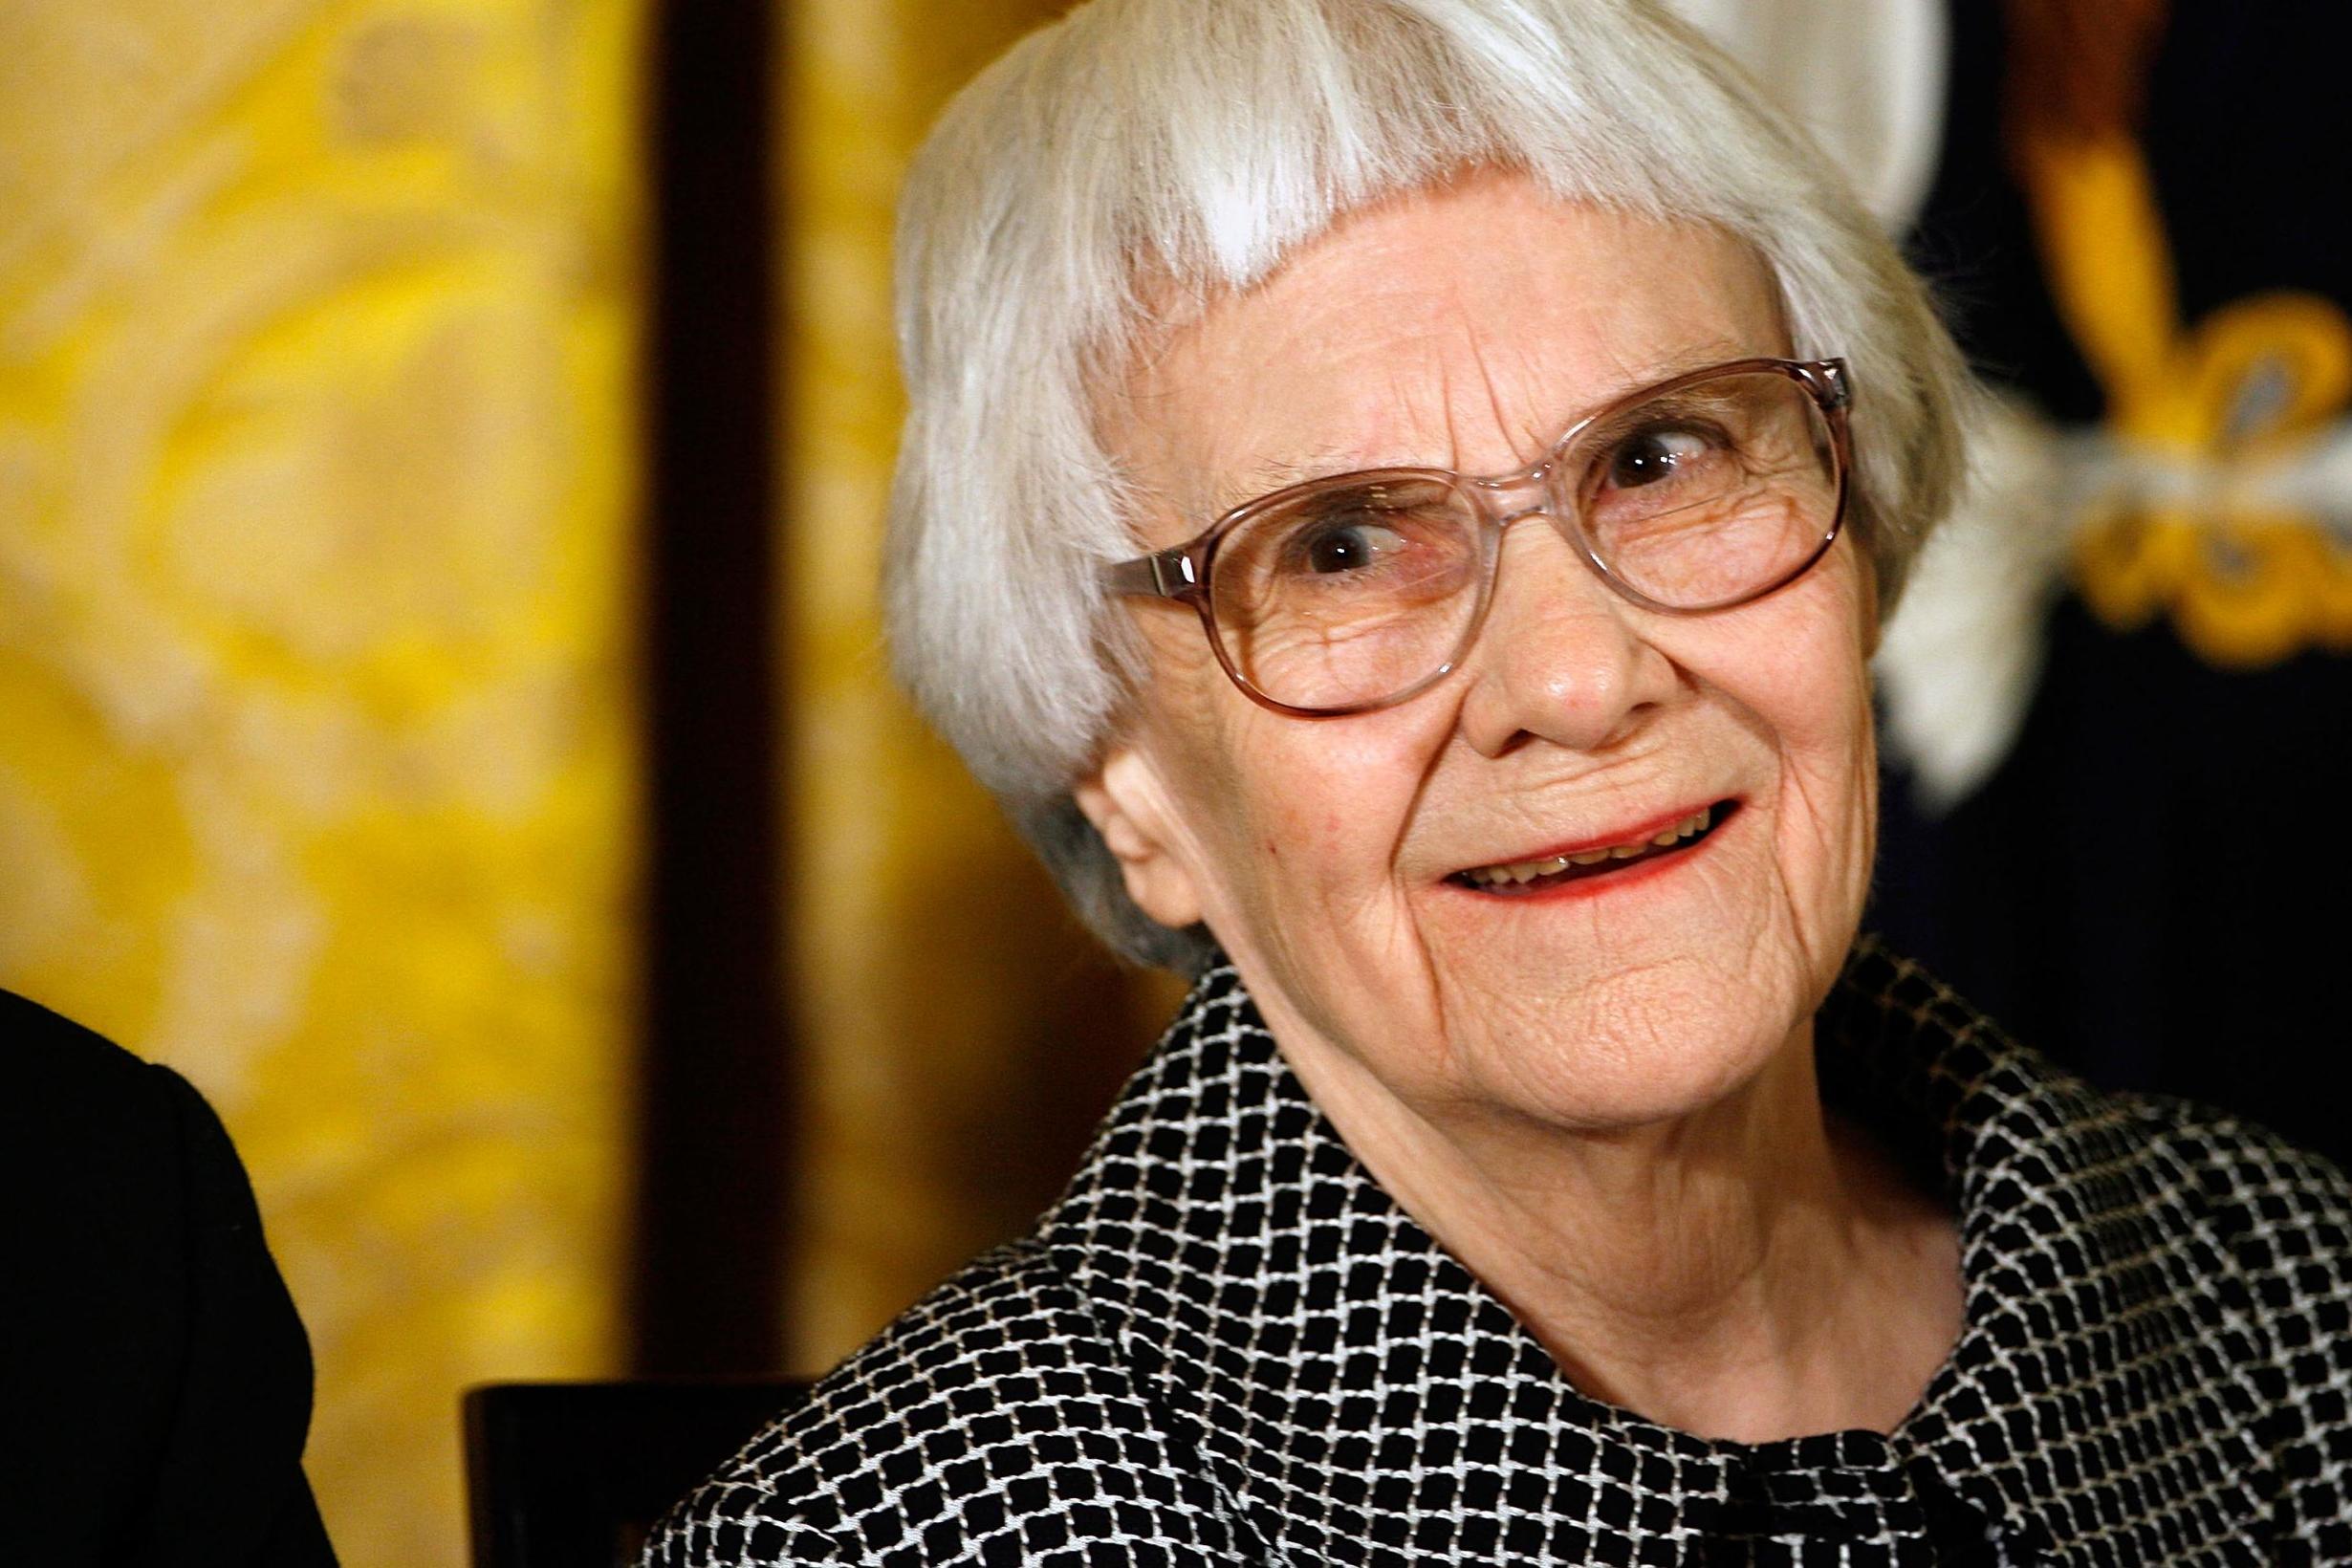 Harper Lee’s ‘To Kill a Mockingbird’ was published in 1960